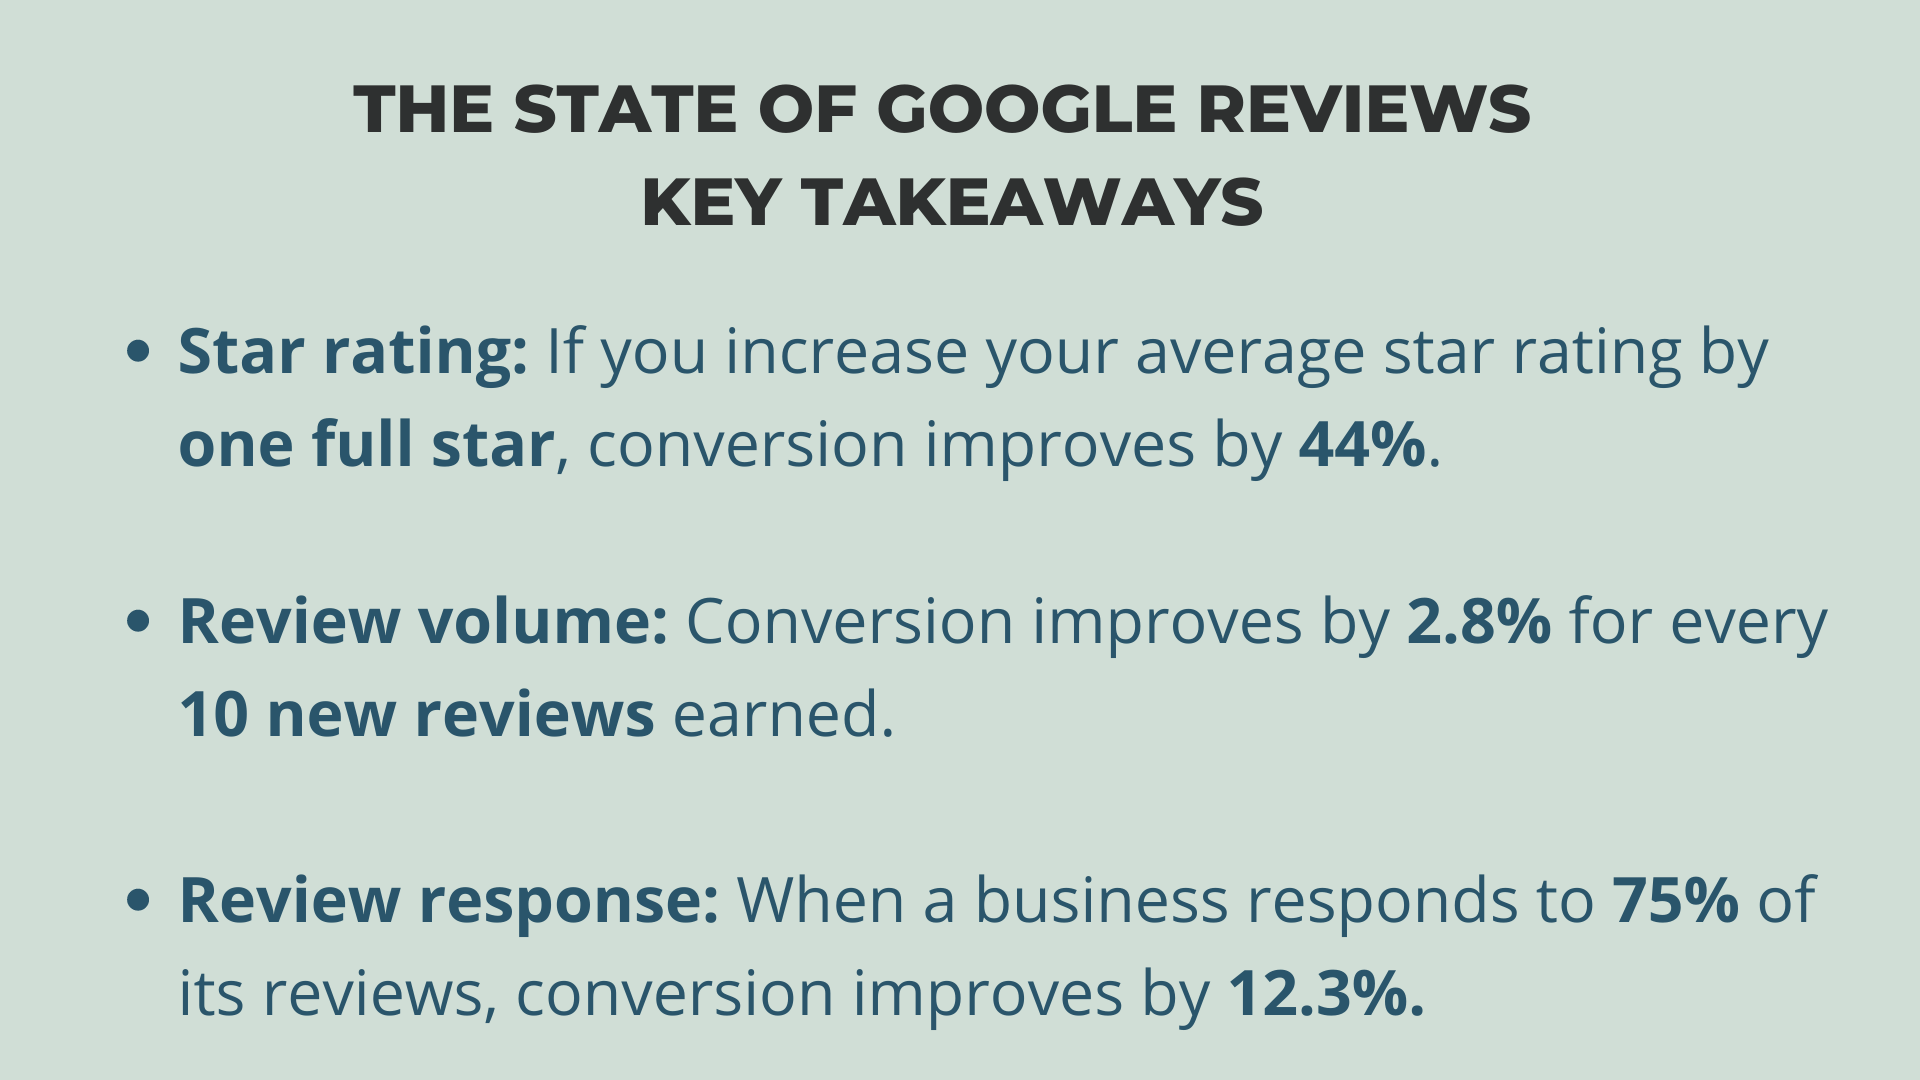 Light green background with a black title and navy blue bullet point text showing stats on the state of google reviews